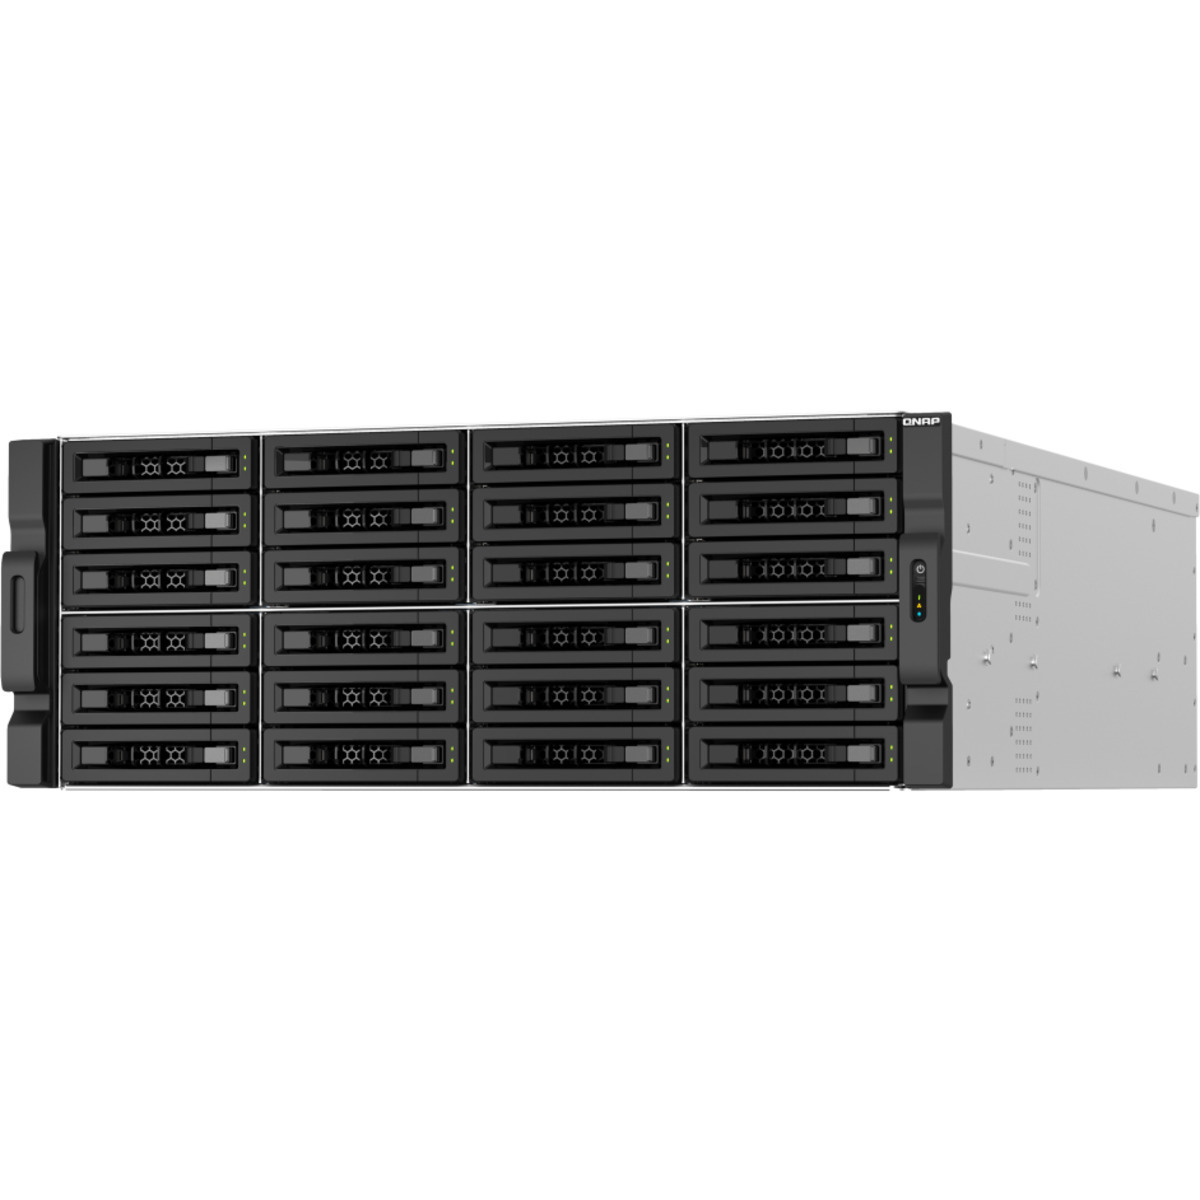 QNAP TS-h3087XU-RP E-2378 QuTS hero Edition 114tb 24+6-Bay RackMount Large Business / Enterprise NAS - Network Attached Storage Device 19x6tb Western Digital Red Pro WD6003FFBX 3.5 7200rpm SATA 6Gb/s HDD NAS Class Drives Installed - Burn-In Tested TS-h3087XU-RP E-2378 QuTS hero Edition